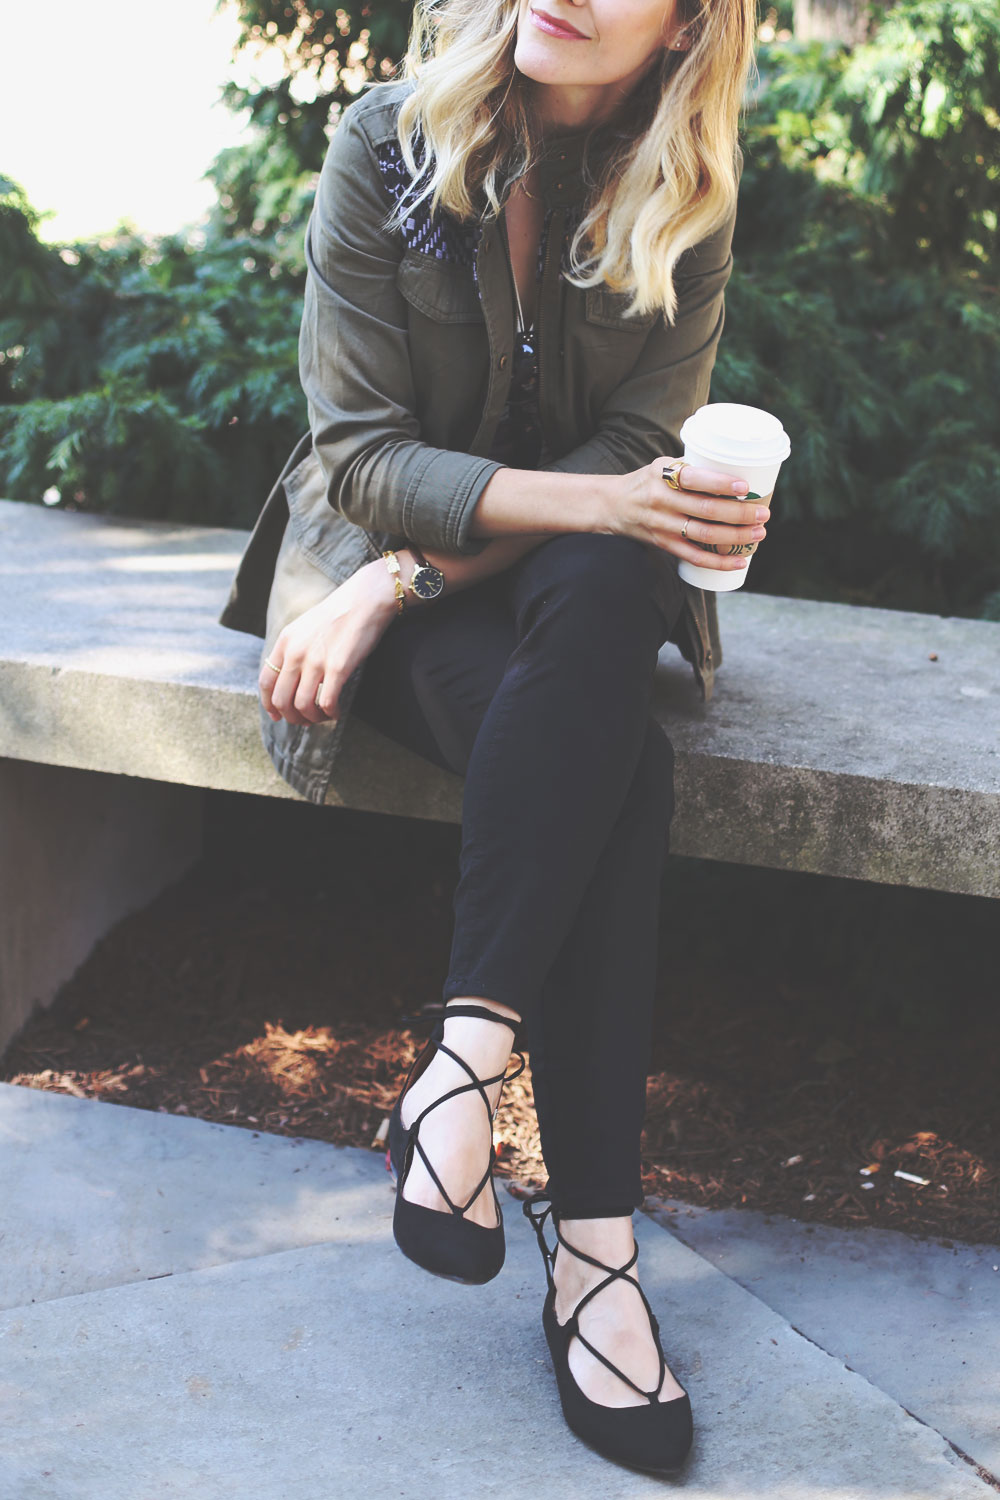 Pair a cargo jacket with a striped tee and lace-up flats for a chic back-to-school look.